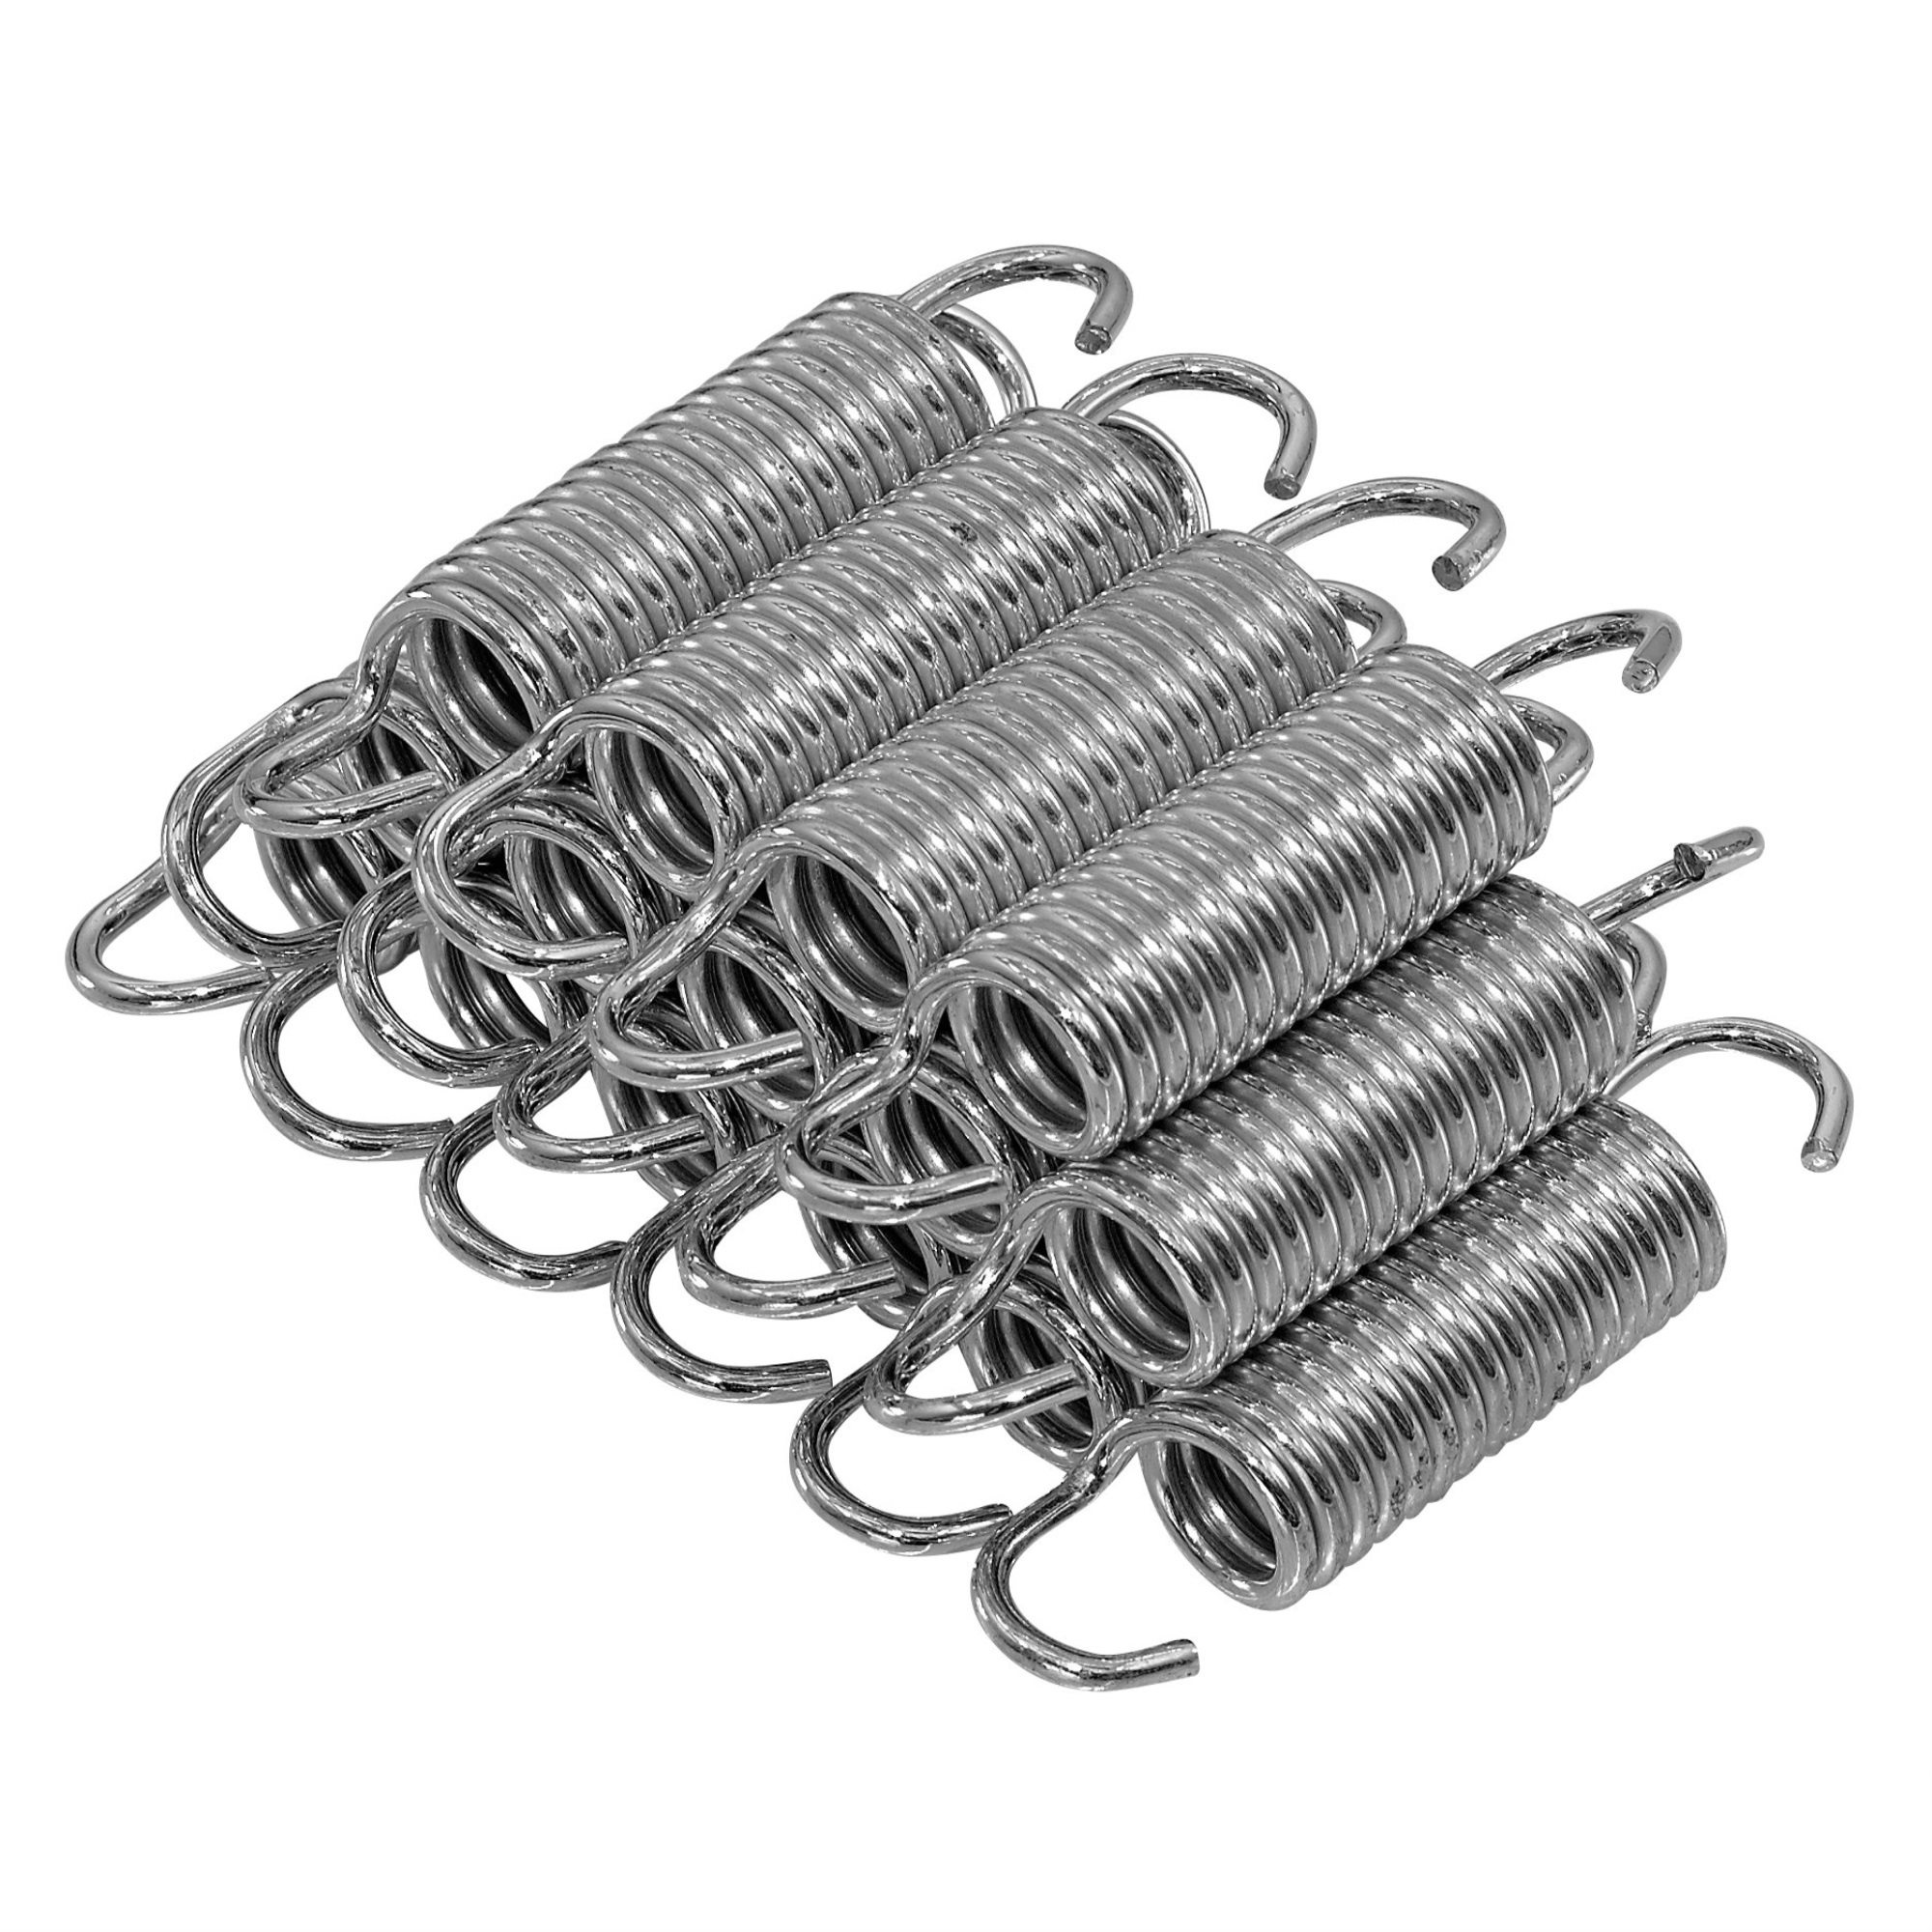 3.5" Trampoline Springs, heavy-duty galvanized, Set of 15 (spring size measures from hook to hook) - image 1 of 2